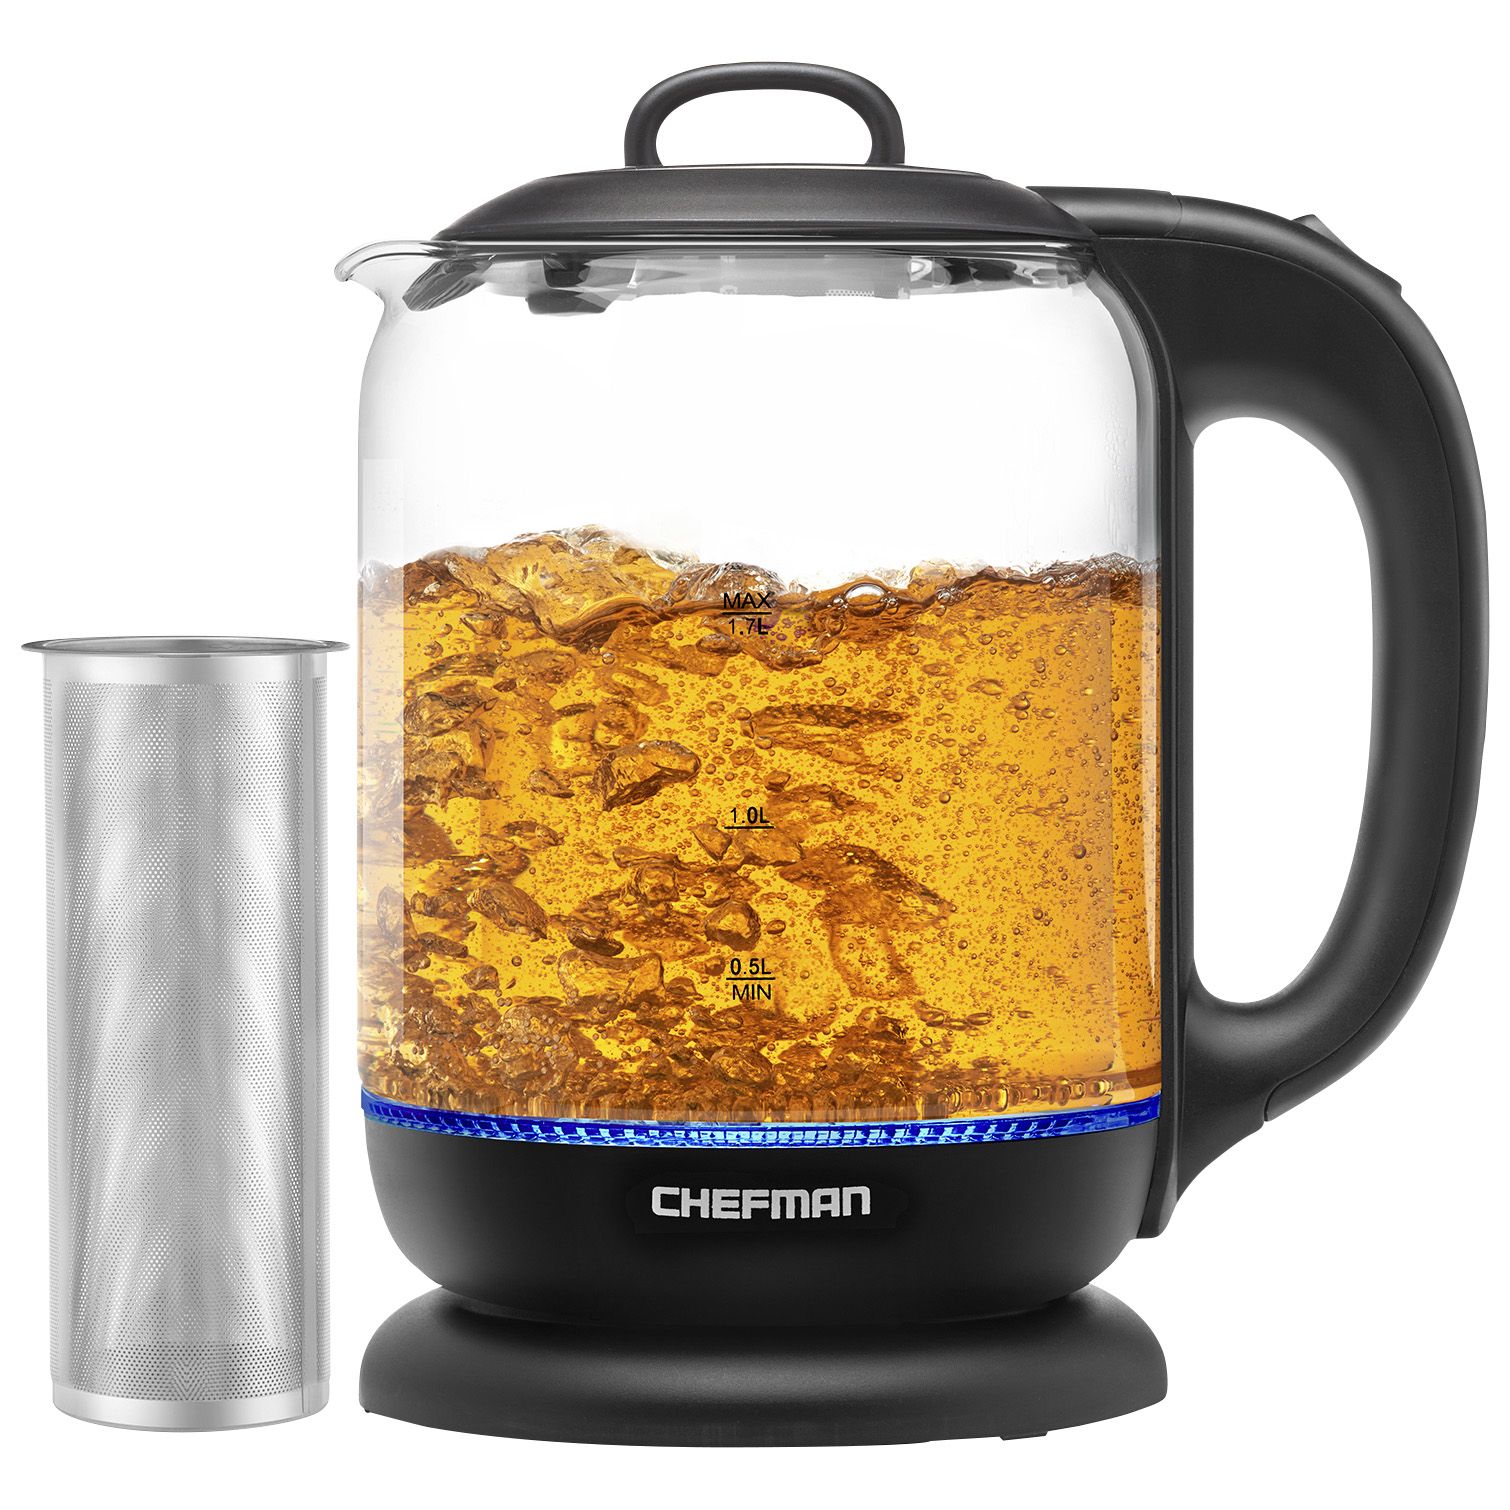  Chefman Digital Electric Kettle with Rapid 3 Minute